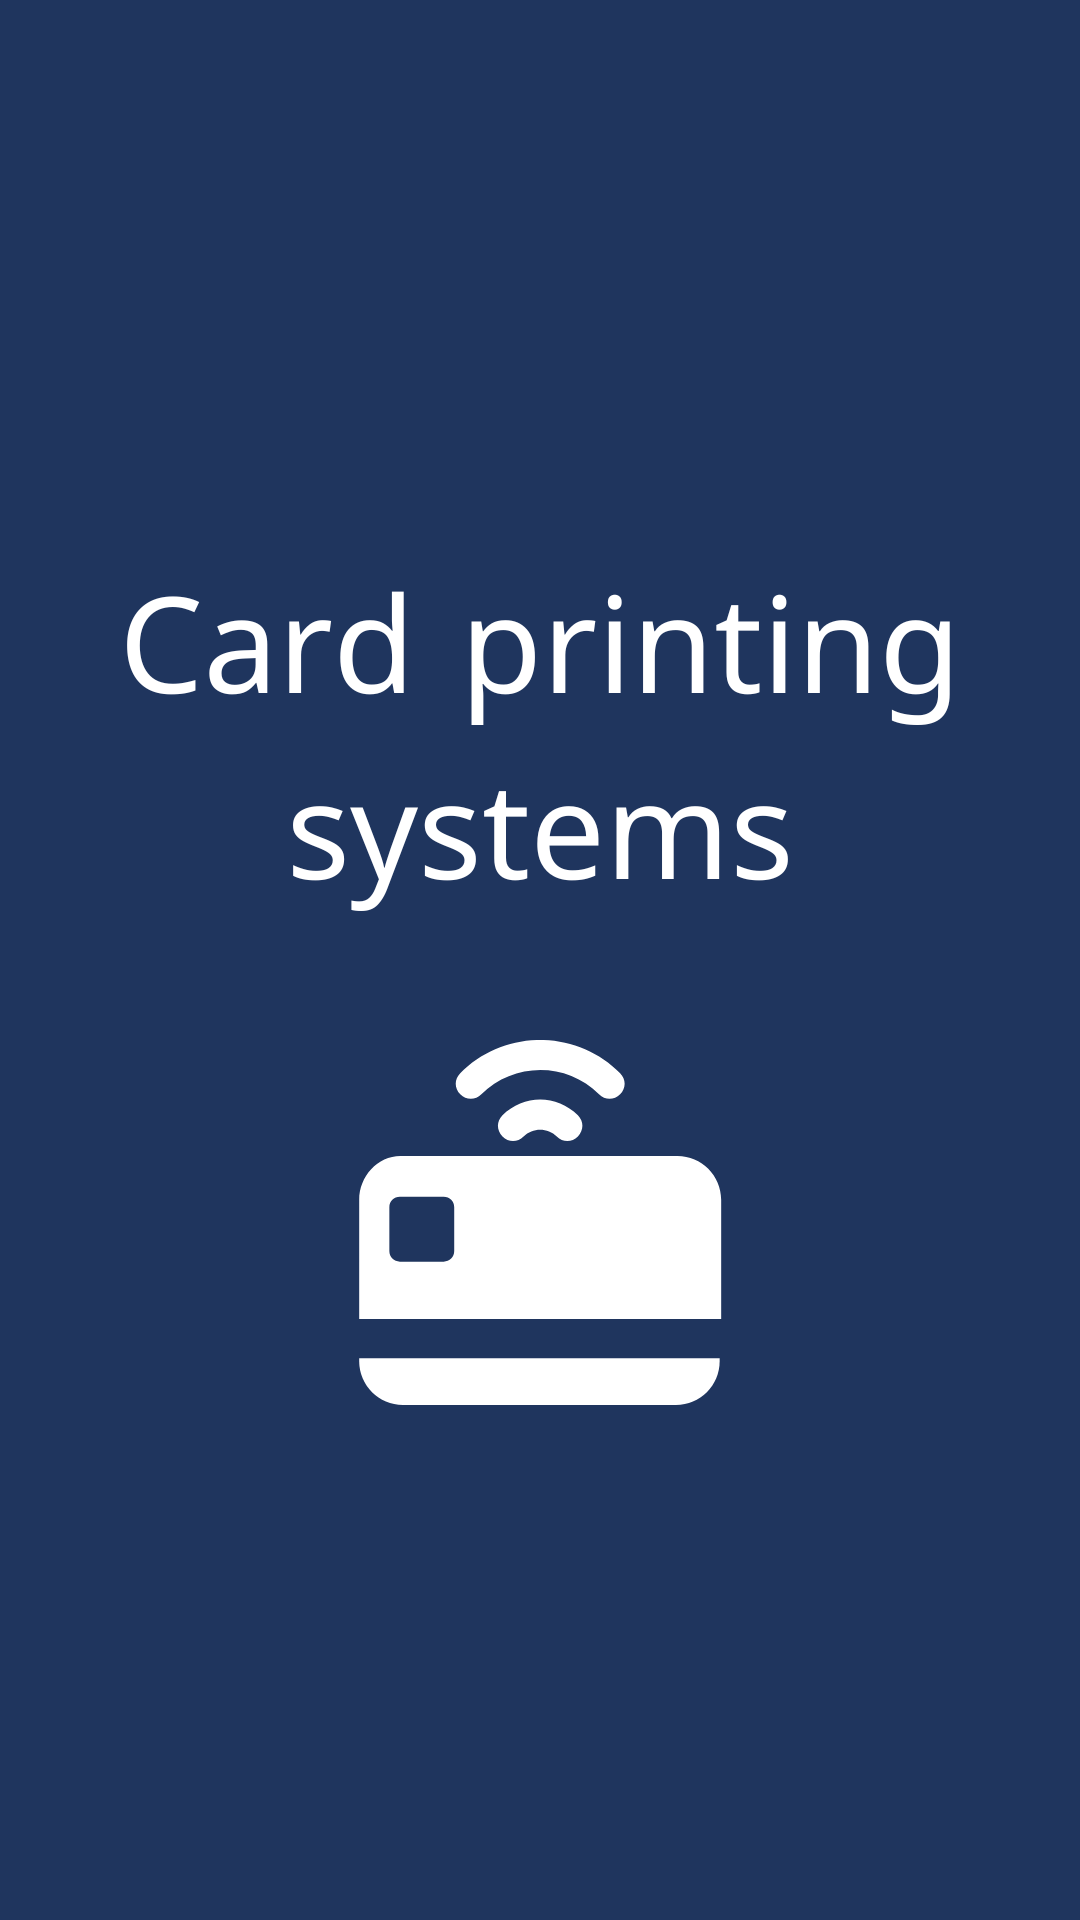 cards printing systems